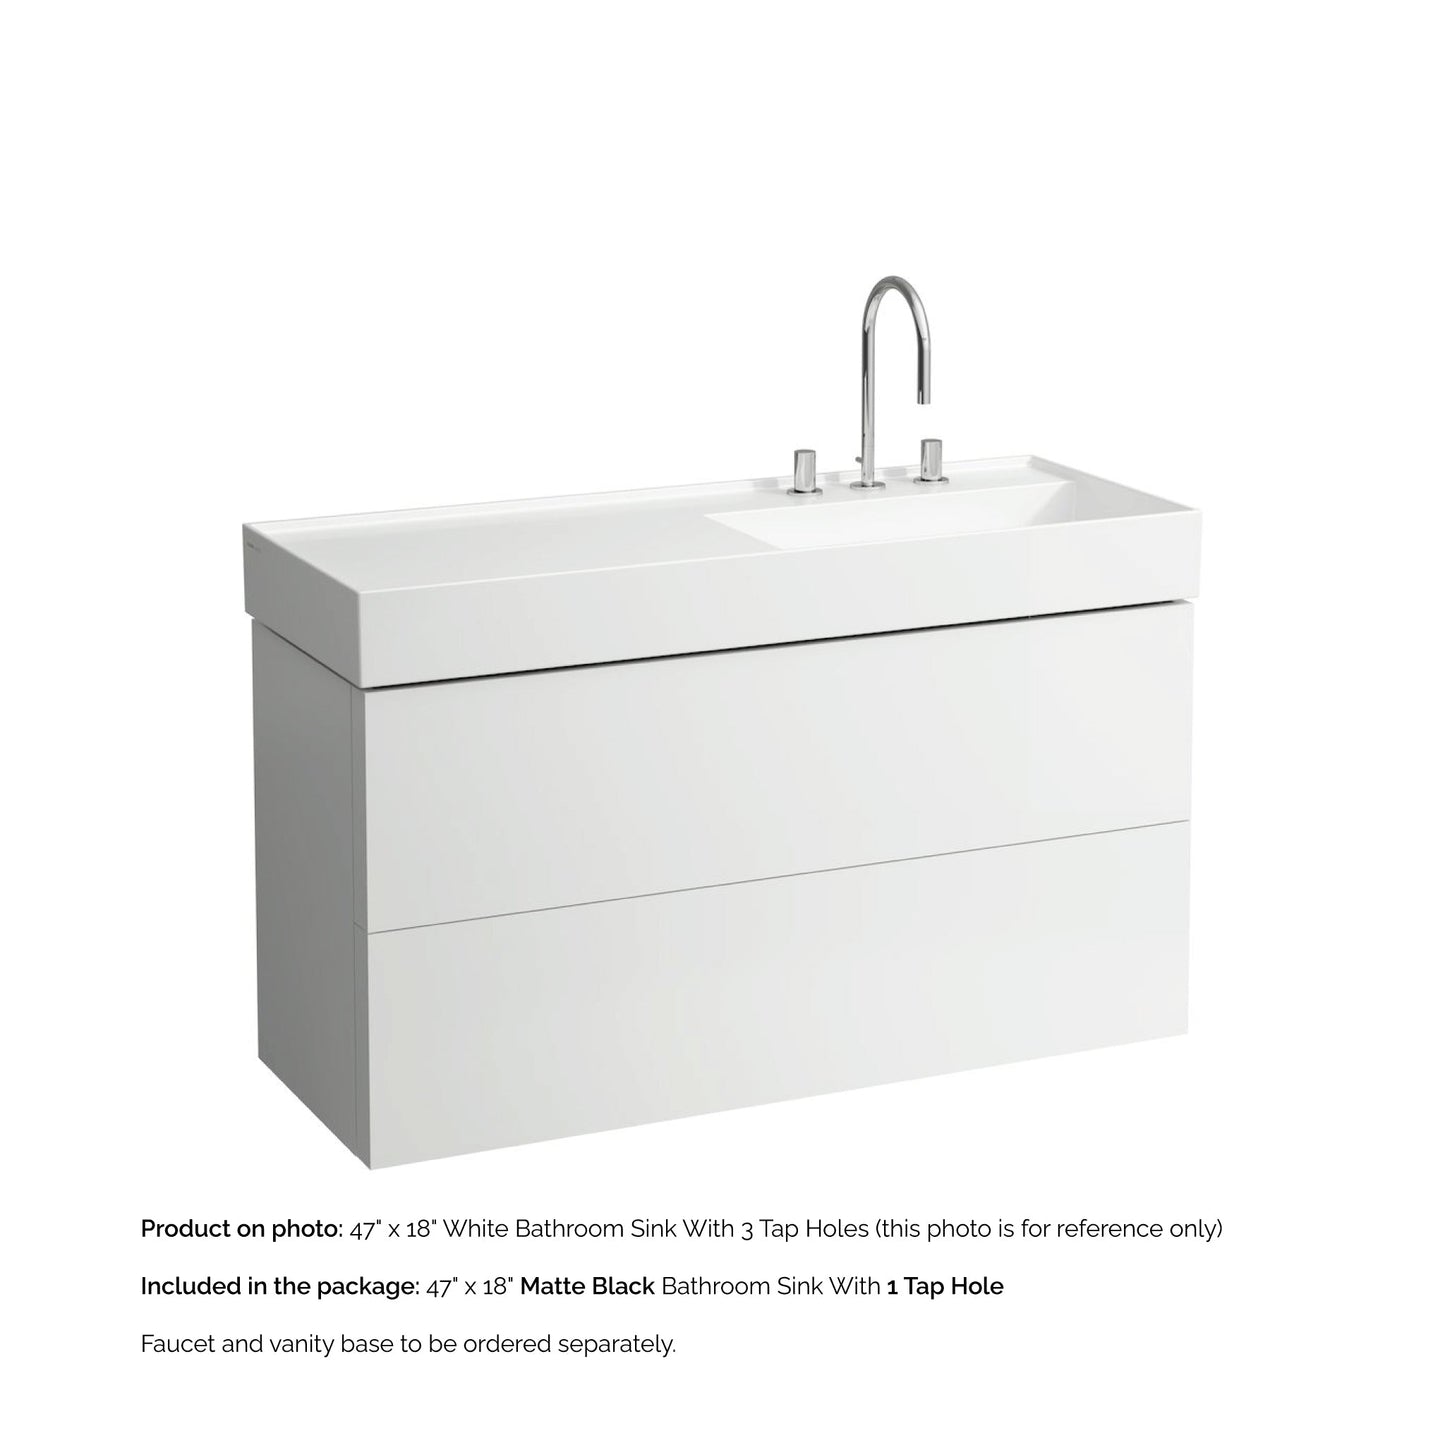 Laufen Kartell 47" x 18" Matte Black Wall-Mounted Shelf-Left Bathroom Sink With Faucet Hole